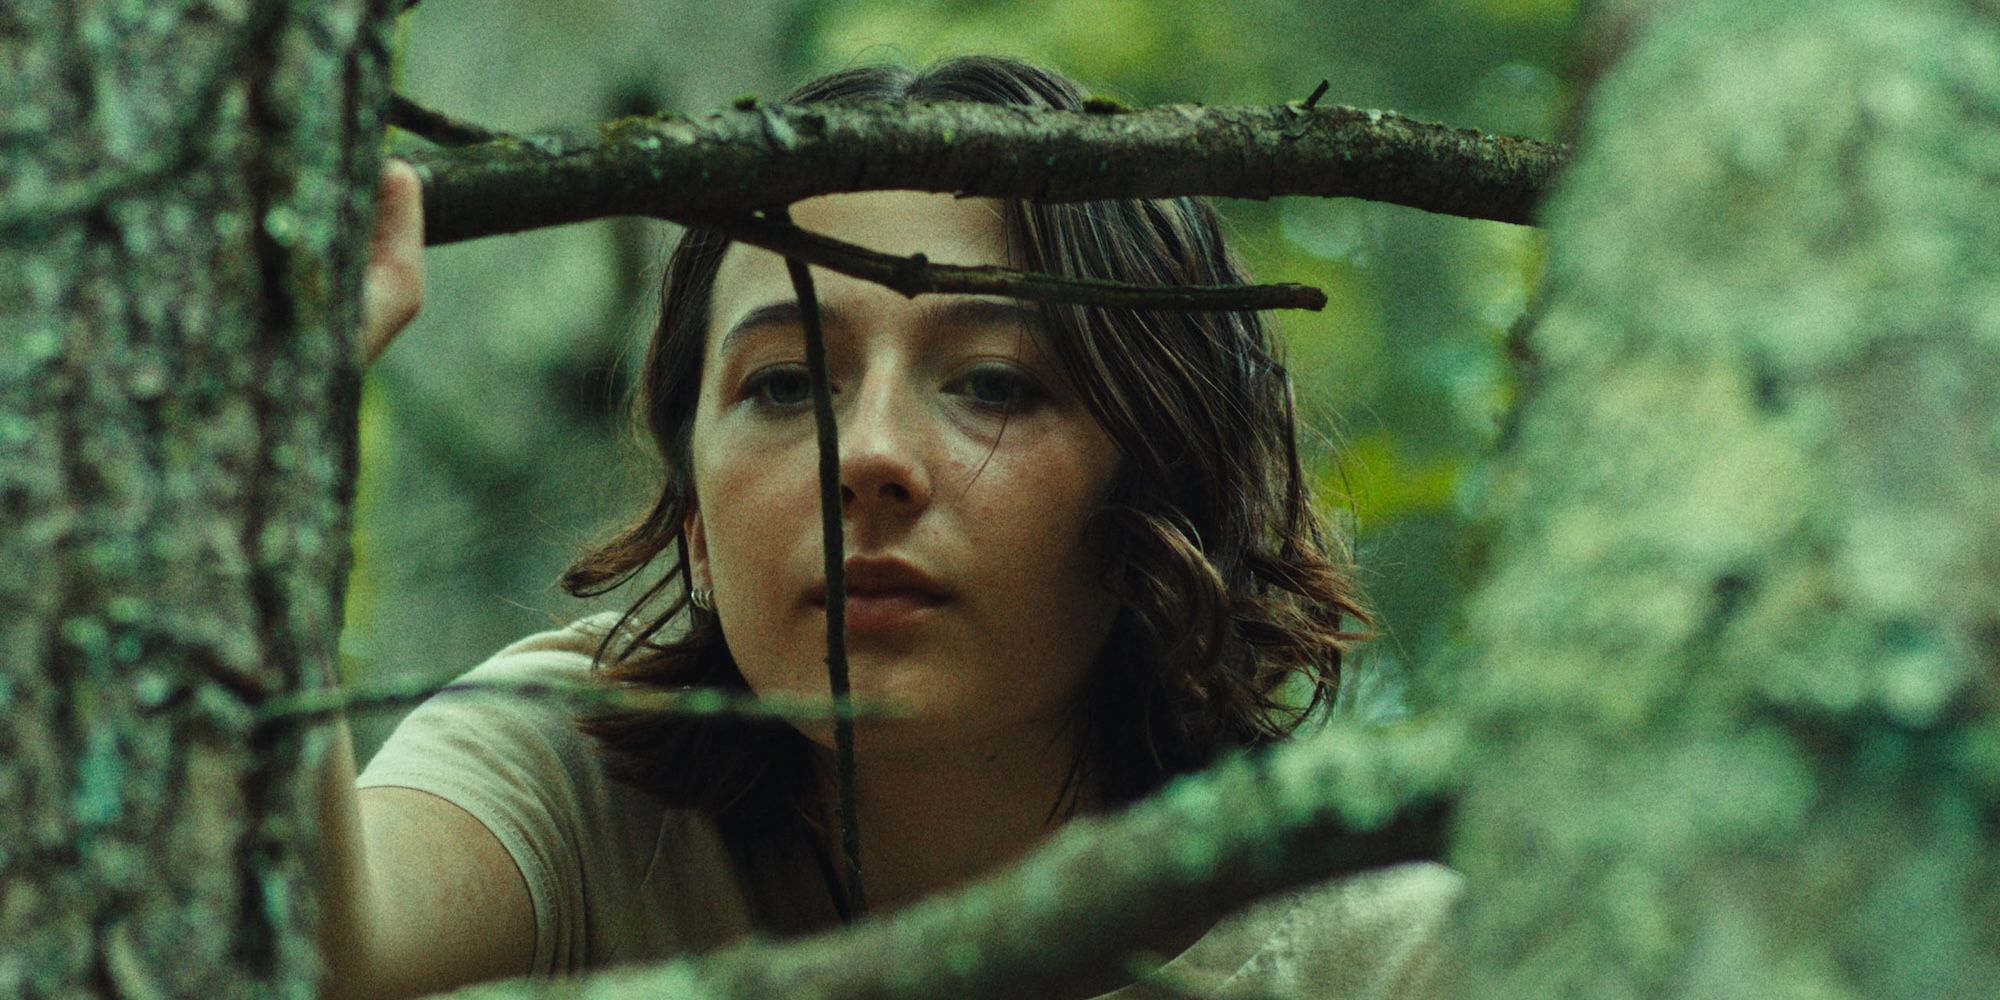 Lilly Collias as Sam looks through a tree's branches in Good One